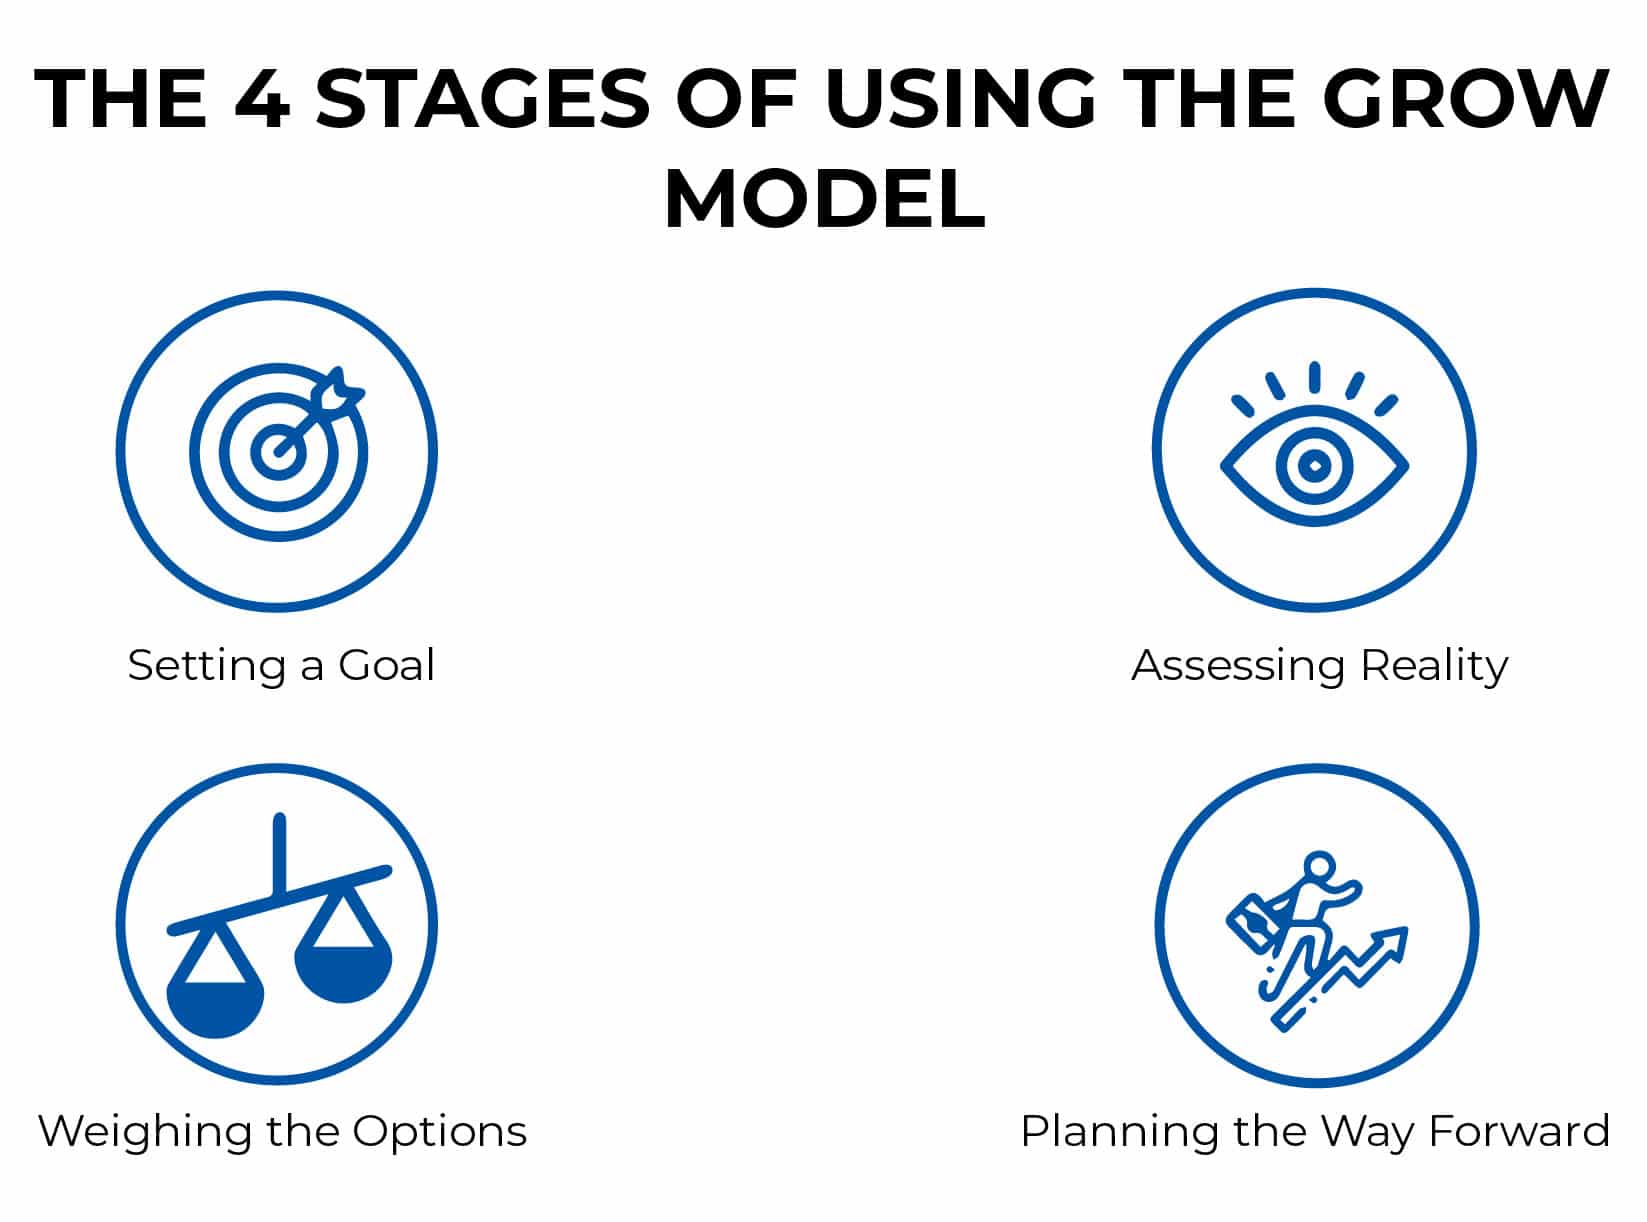 THE 4 STAGES OF USING THE GROW MODEL